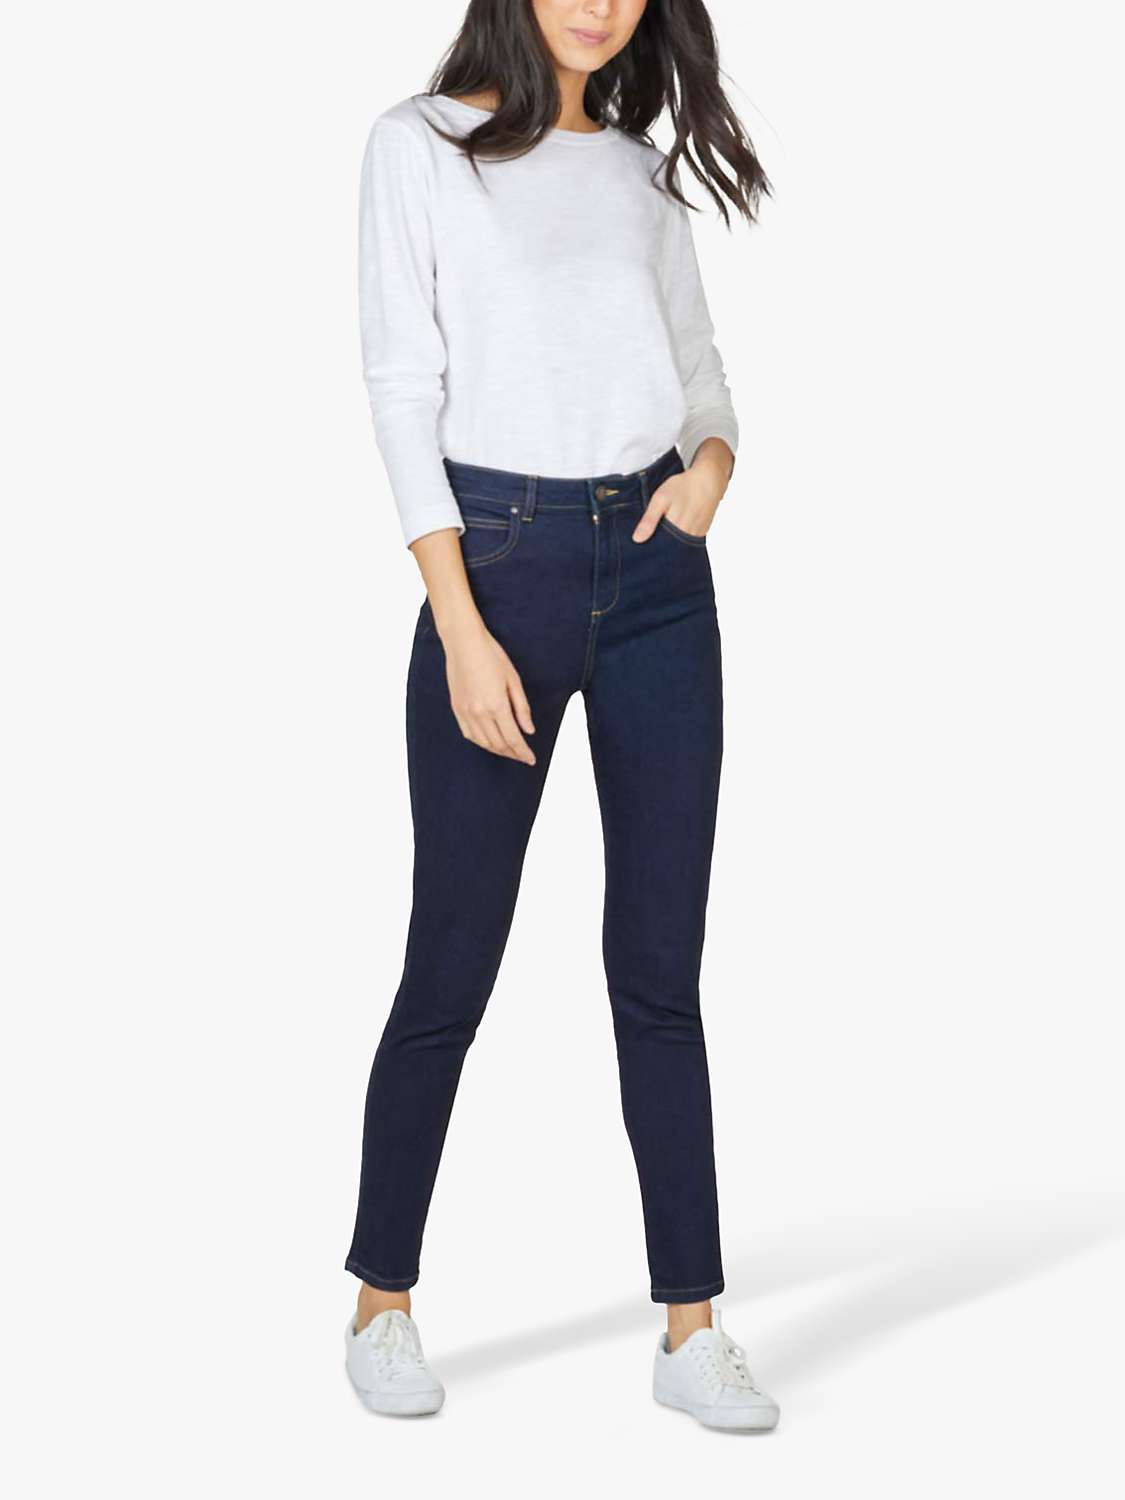 Buy Thought GOTS Organic Cotton Skinny Jeans Online at johnlewis.com